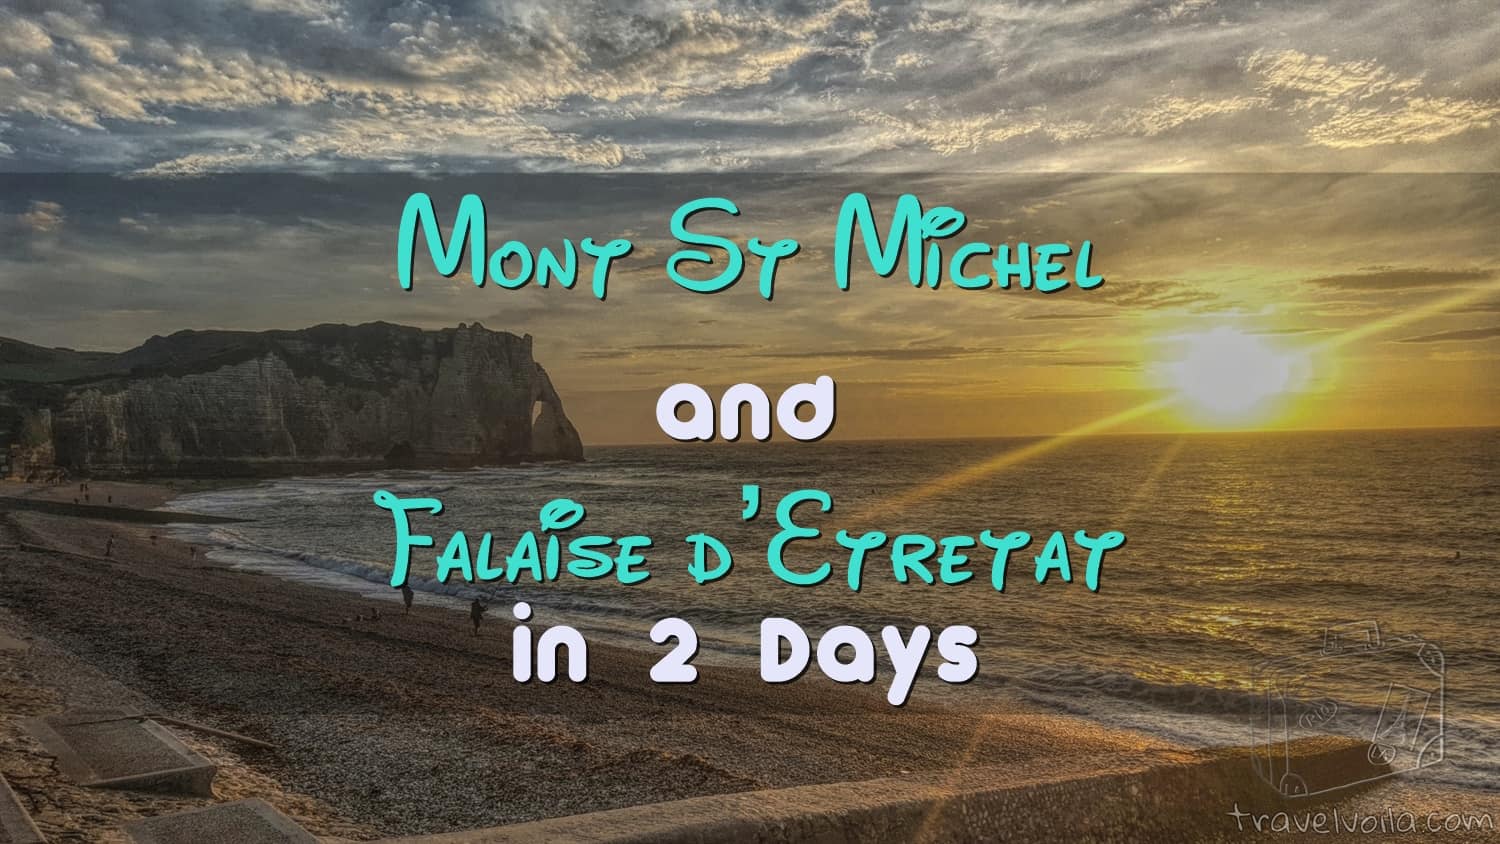 Mont St Michel and Falaise d’Etretat in 2 Days